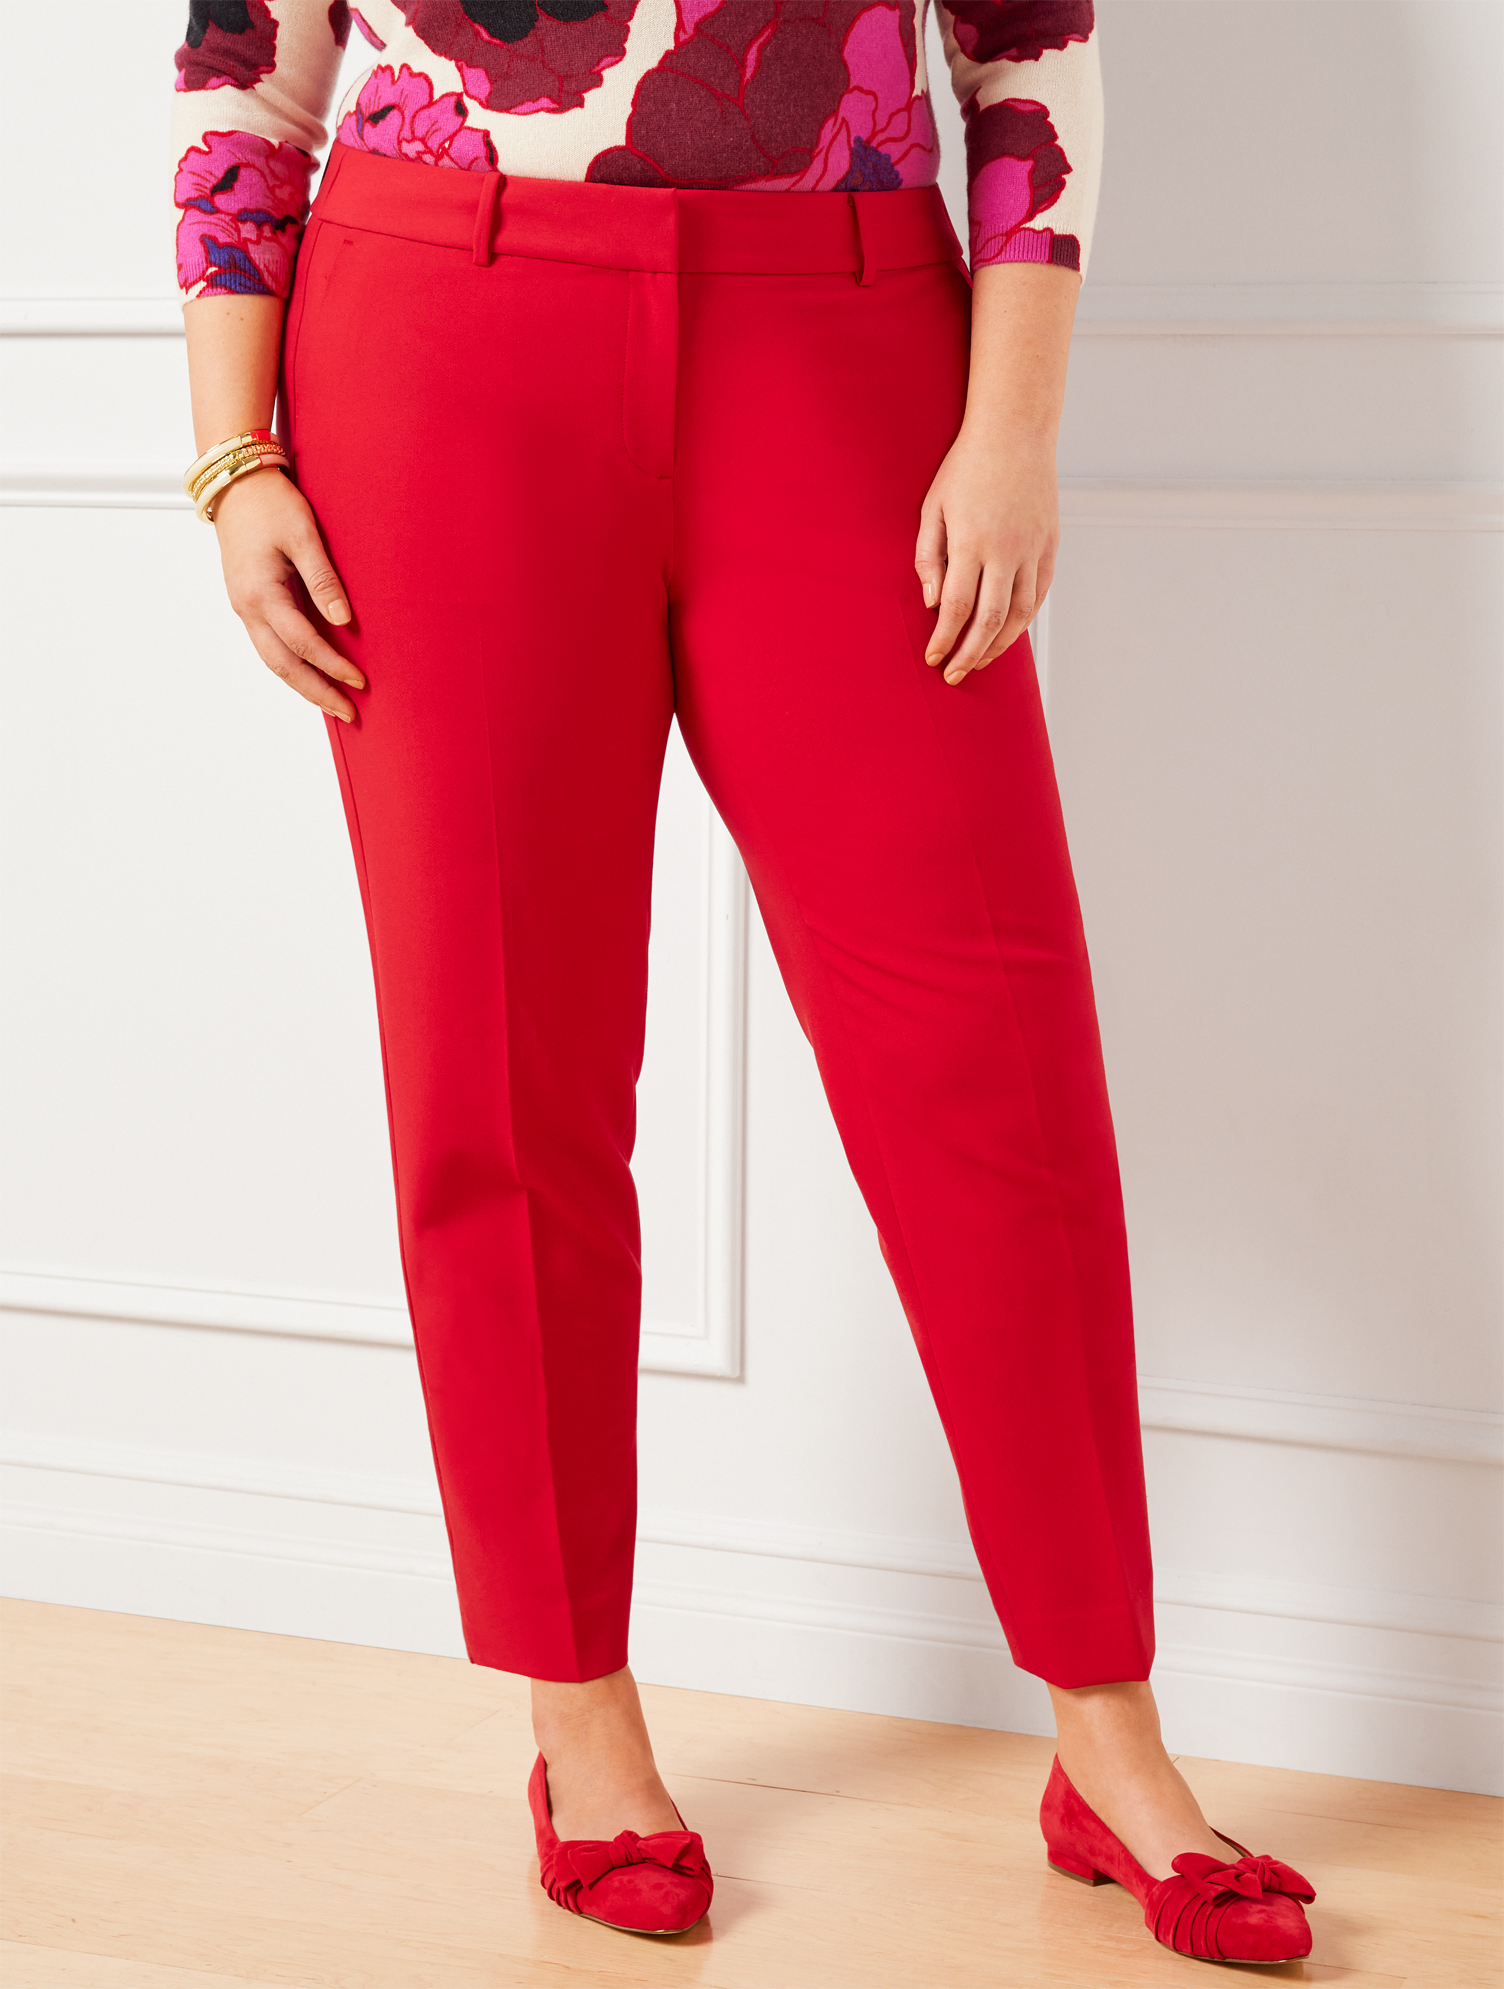 Talbots Plus Size -  Hampshire Ankle Pants - Red - 16